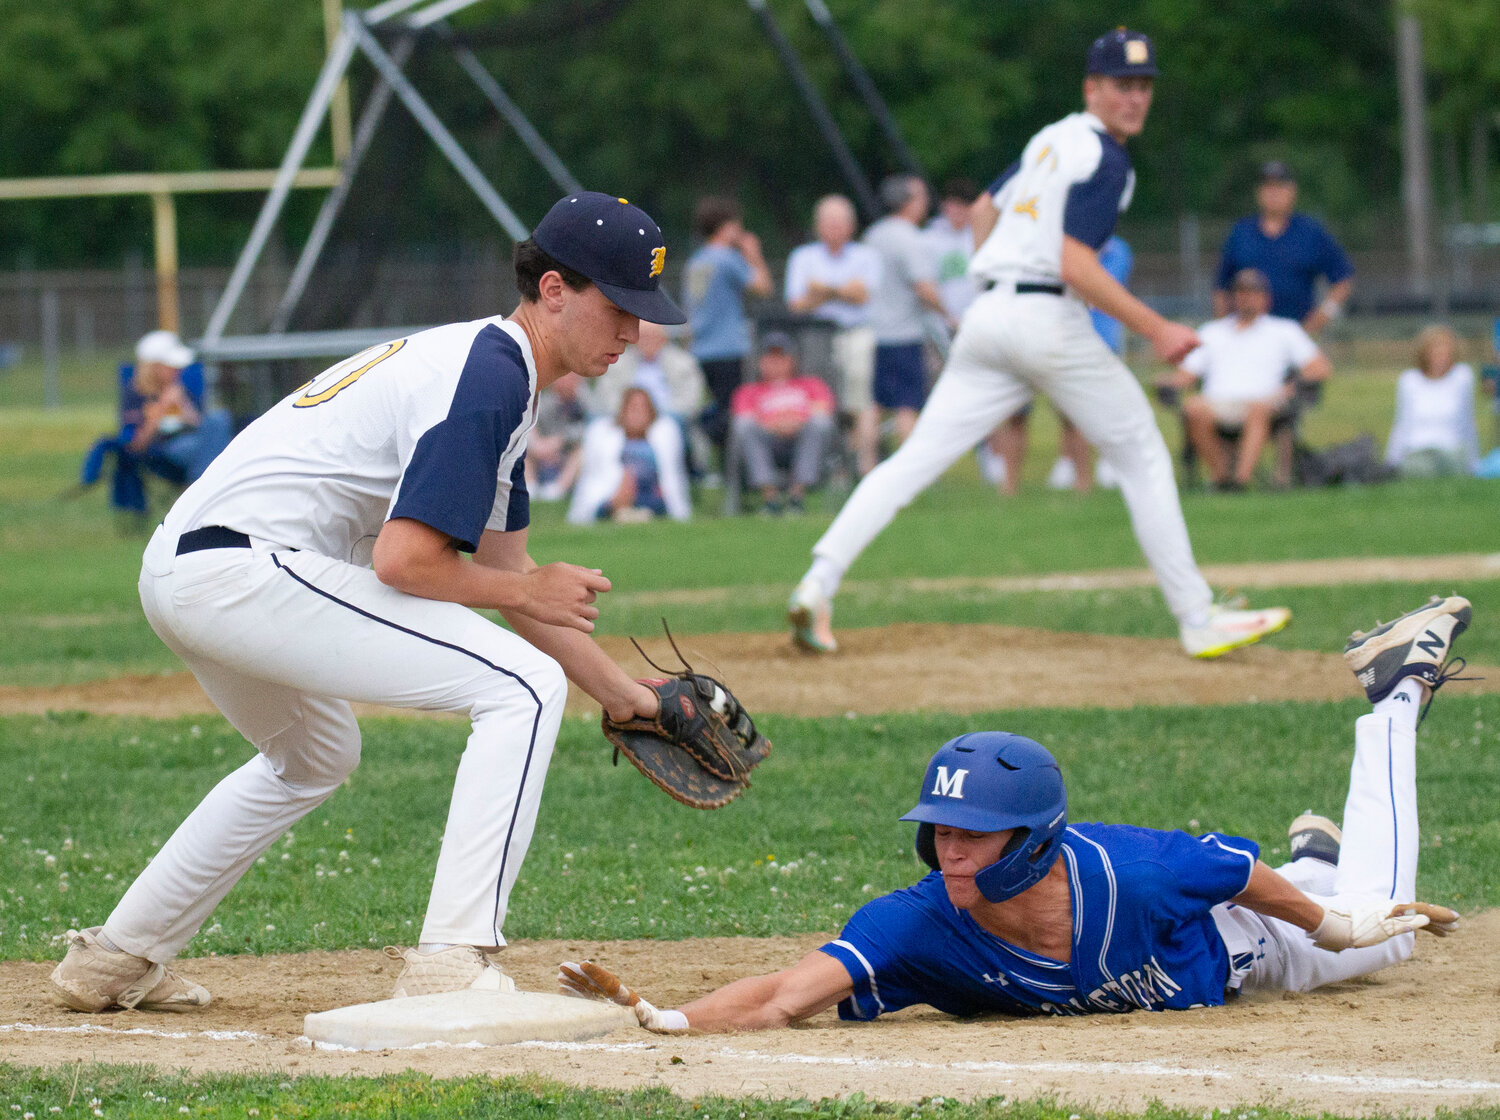 Nick Scandura takes a pick-off throw from pitcher Harrison Cooley during Friday’s game.